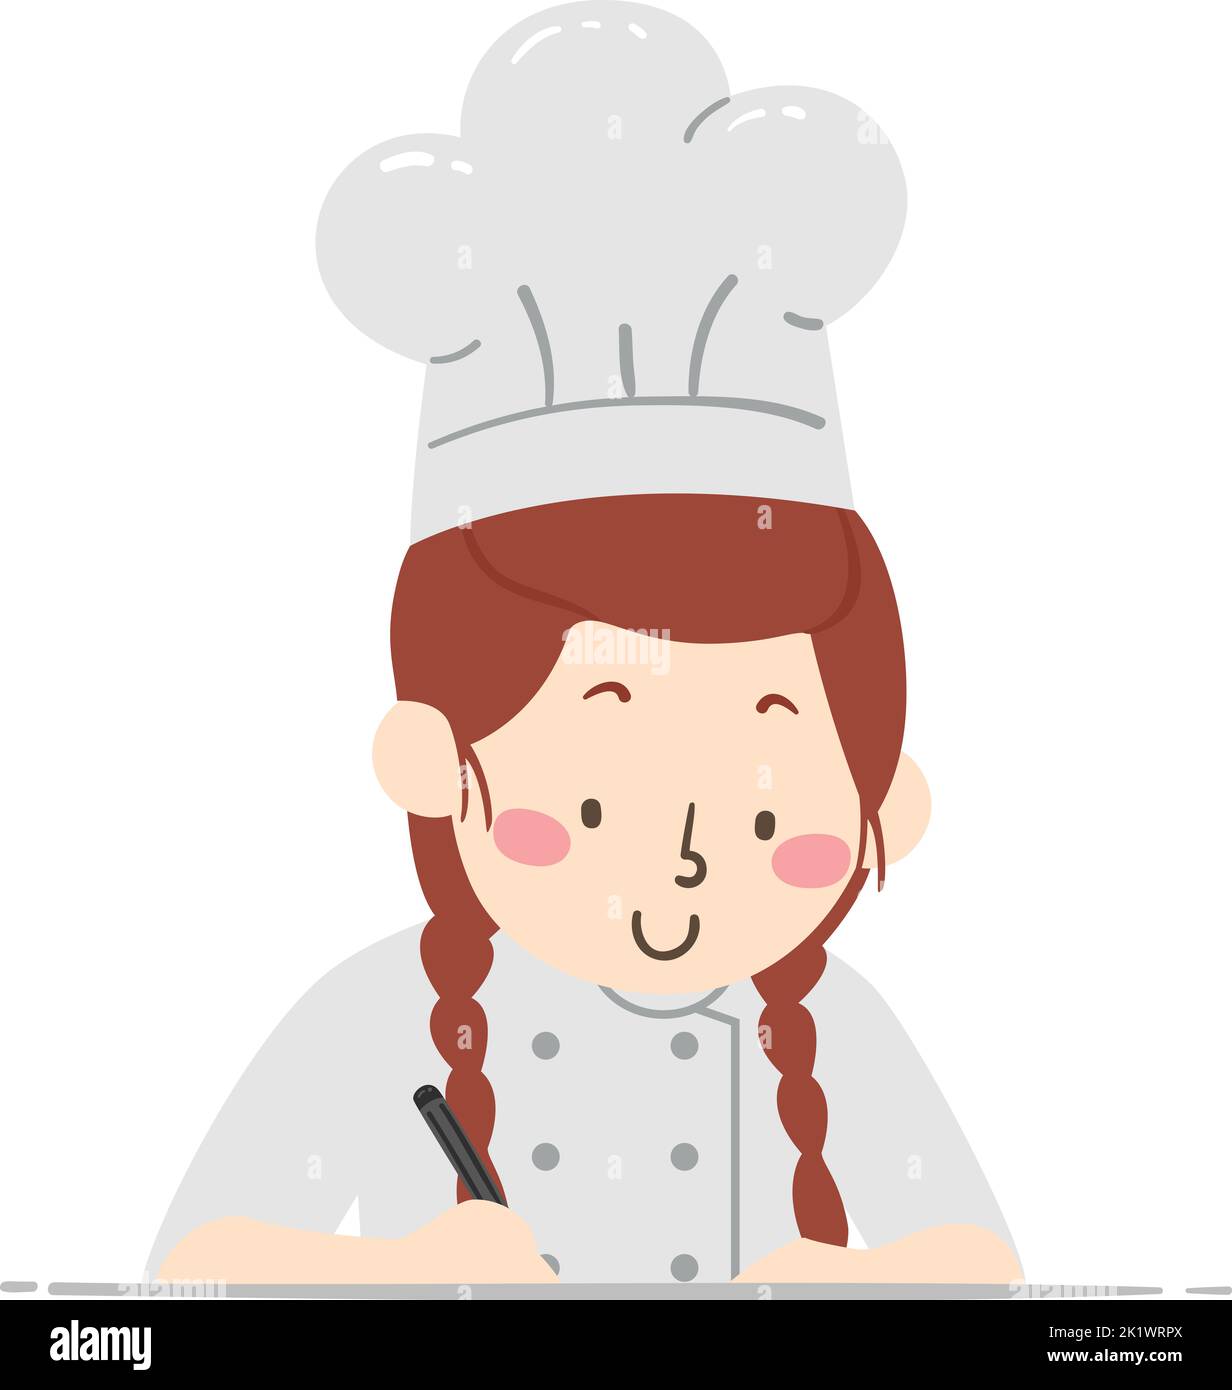 Illustration of Teen Girl Chef Wearing Coat and Toque Blanche Hat Writing with a Pen Stock Photo